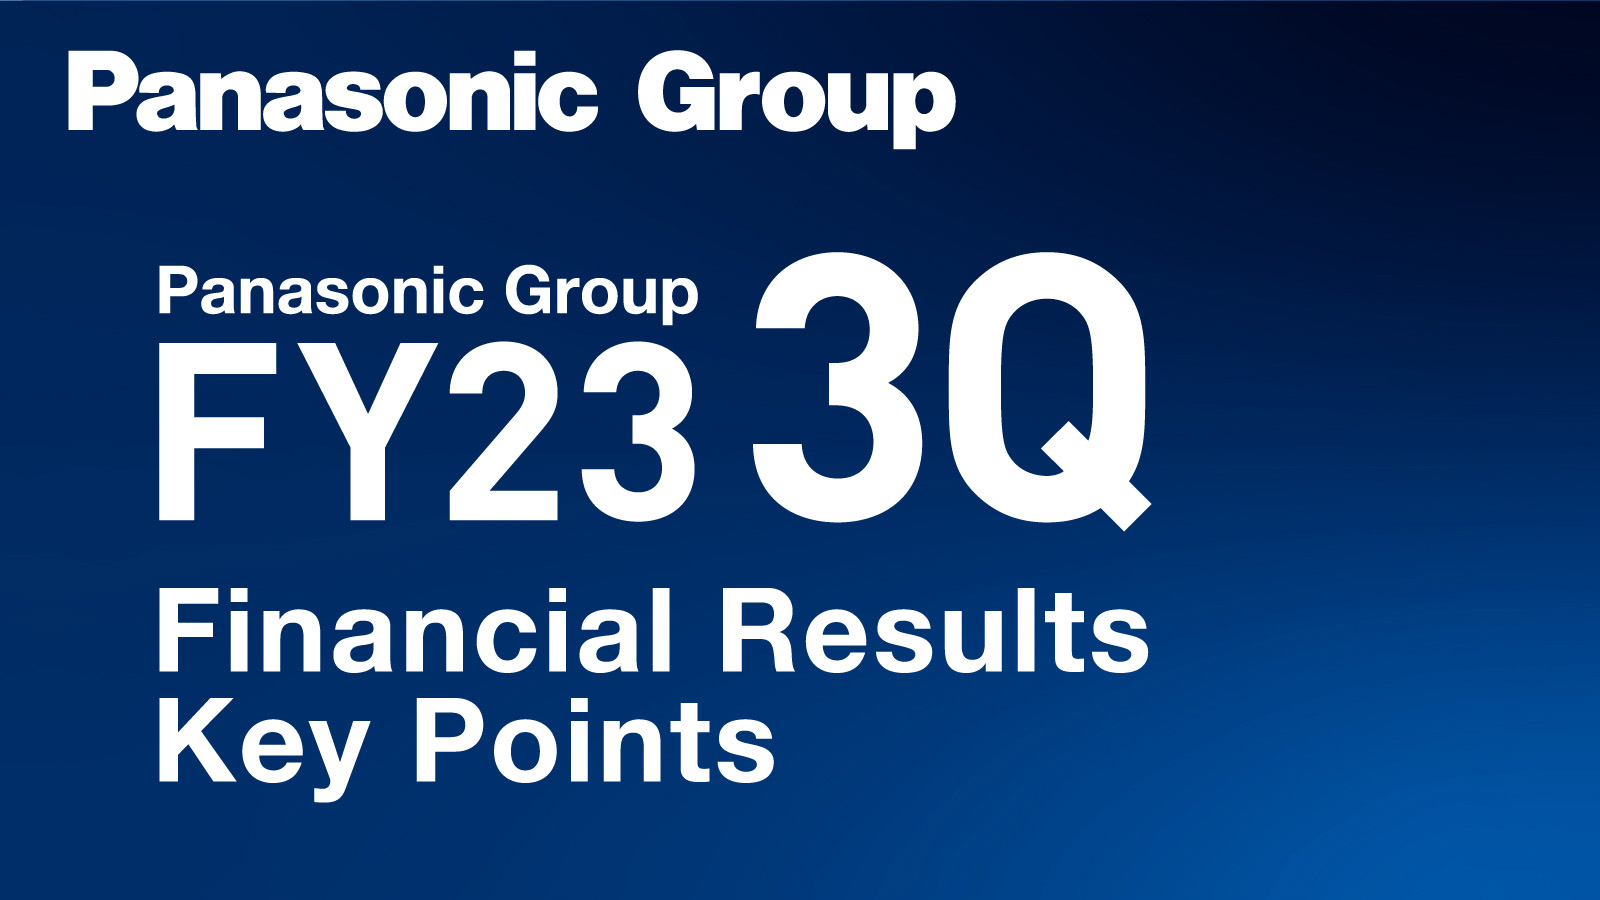 Panasonic Group FY23 3Q Financial Results Key Points